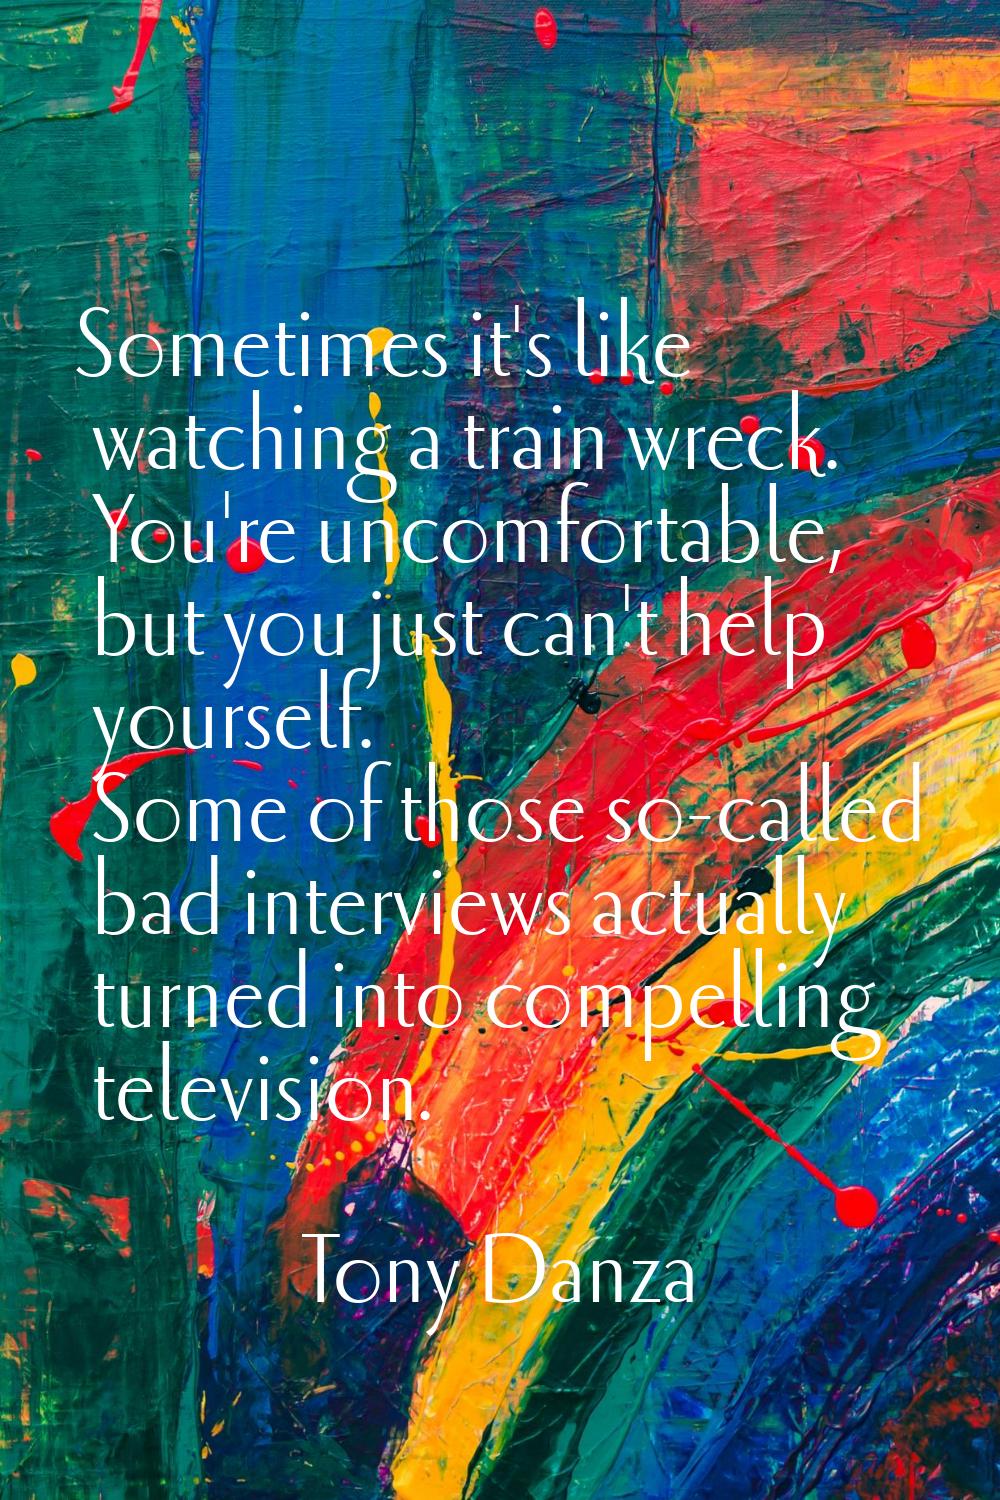 Sometimes it's like watching a train wreck. You're uncomfortable, but you just can't help yourself.